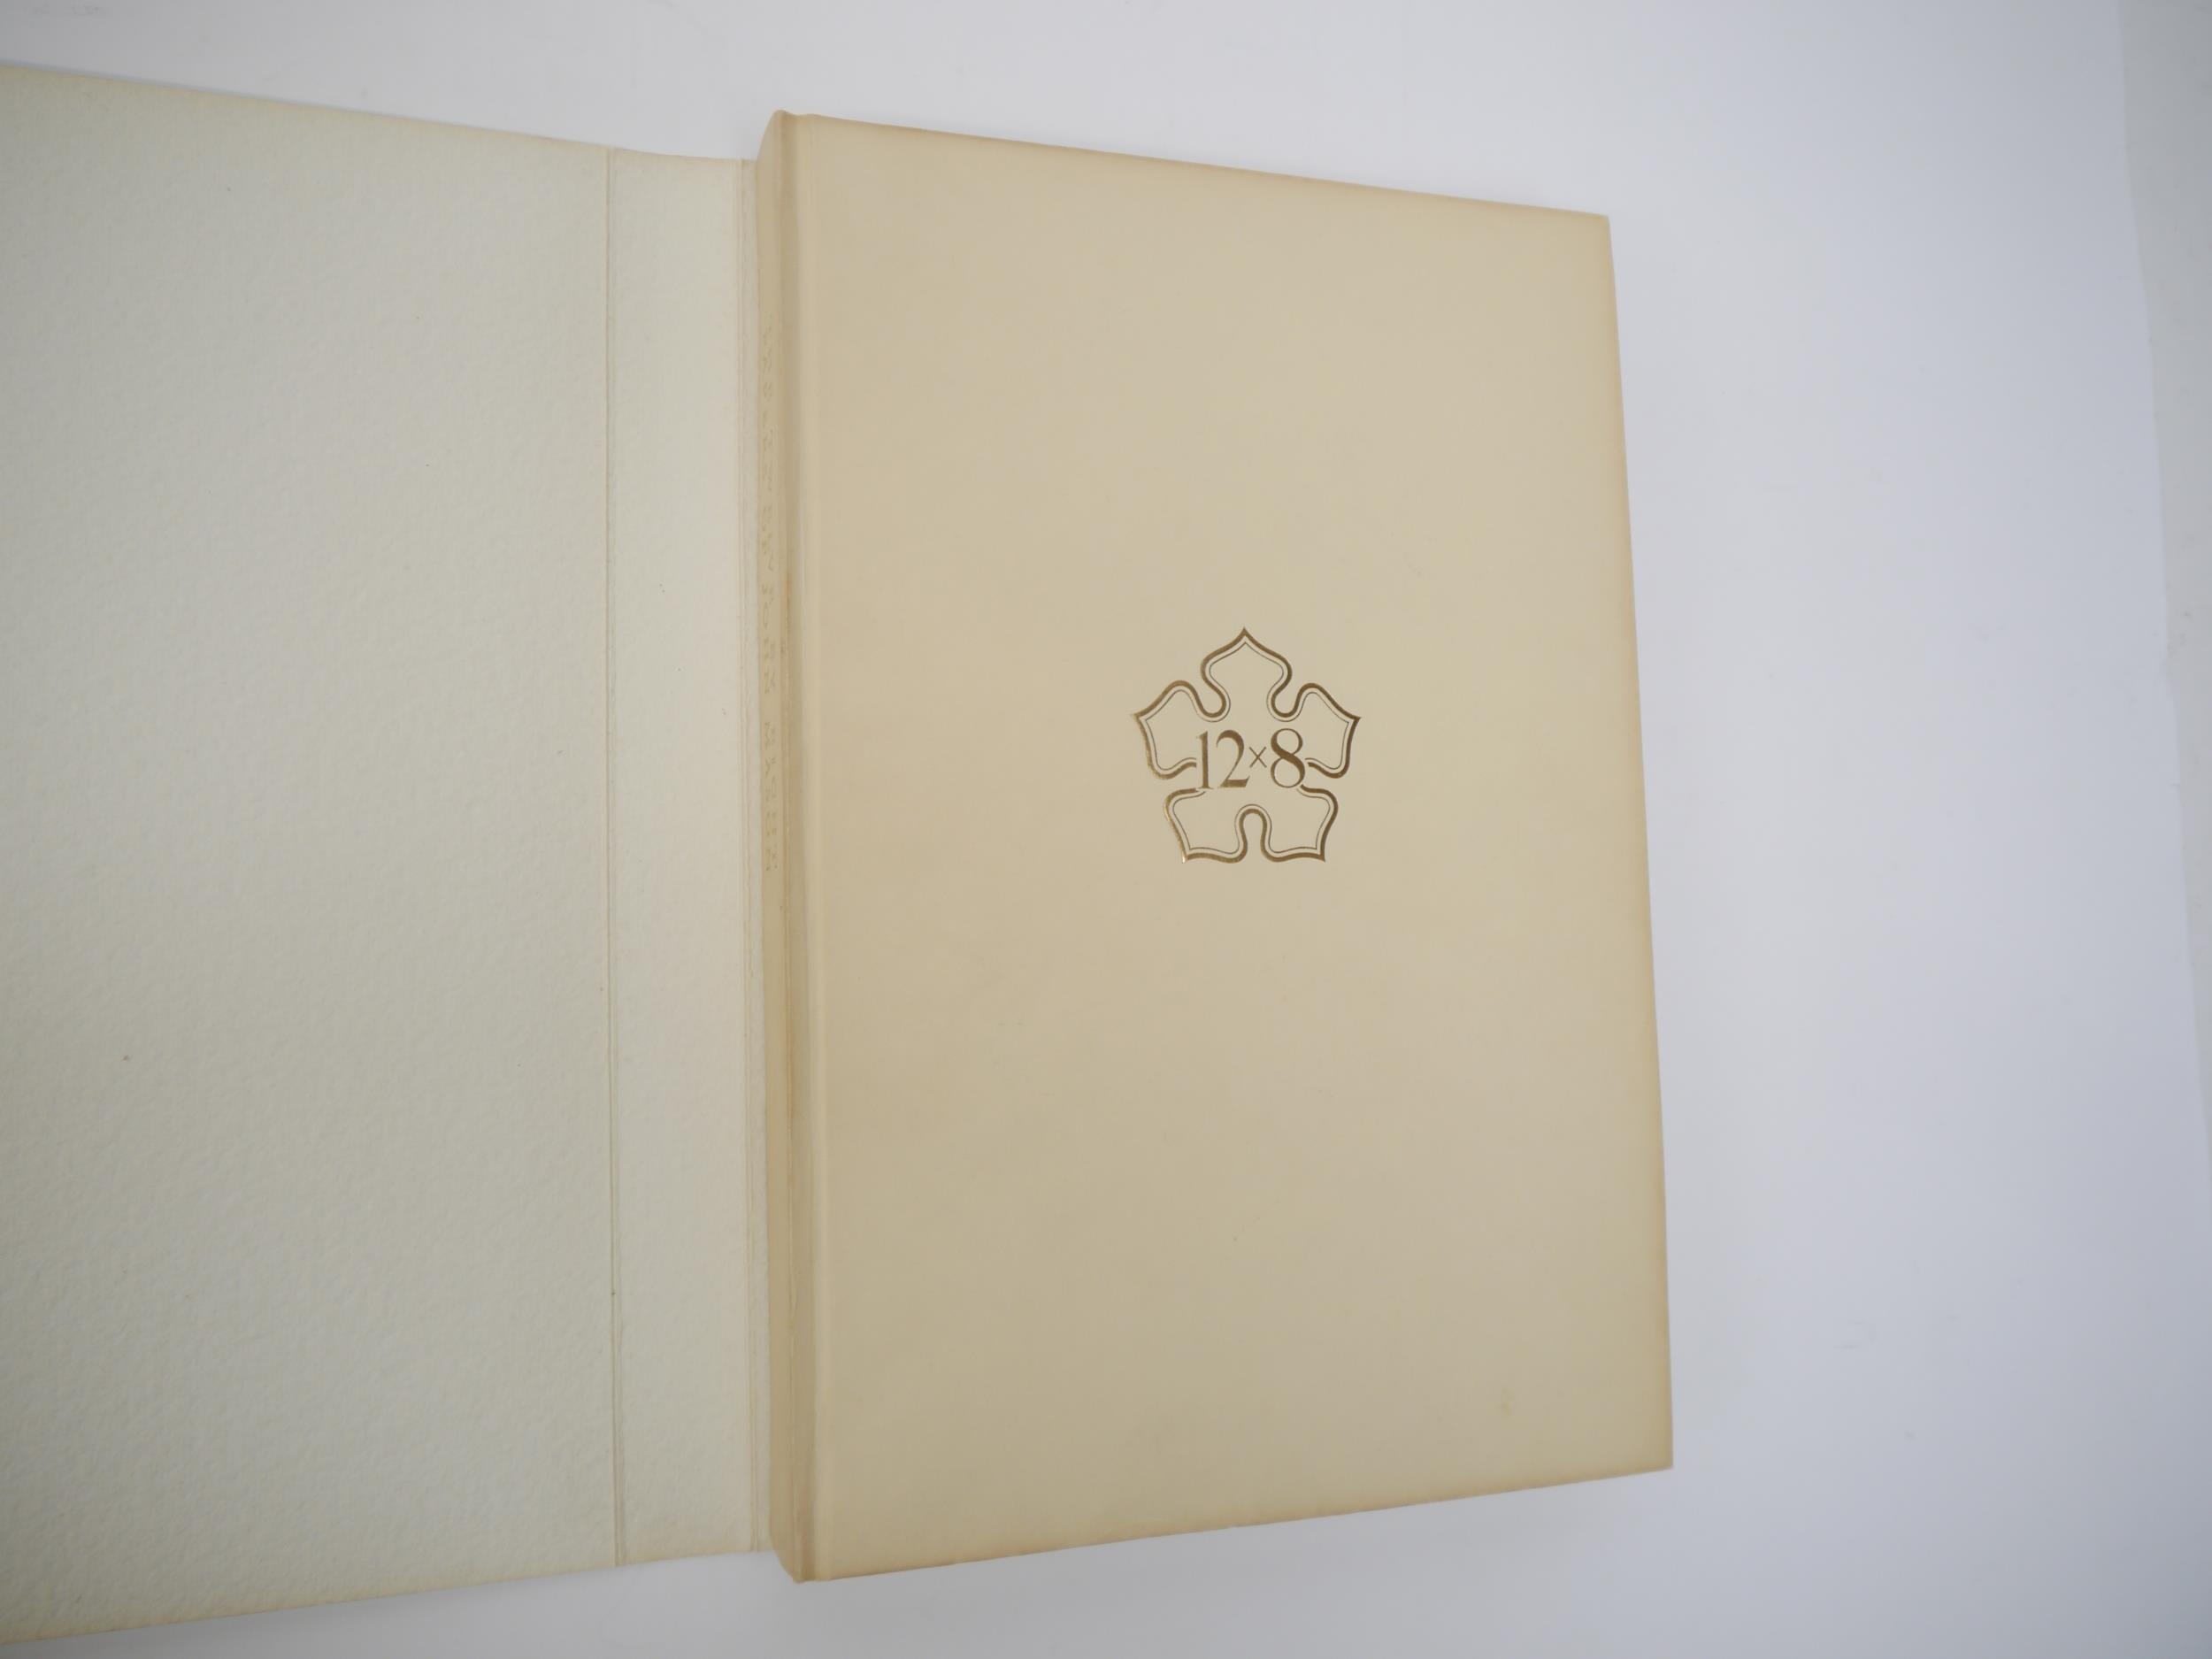 (Twelve by Eight Press.) John Mason: 'More papers handmade by John Mason', Leicester, Twelve by - Image 12 of 13